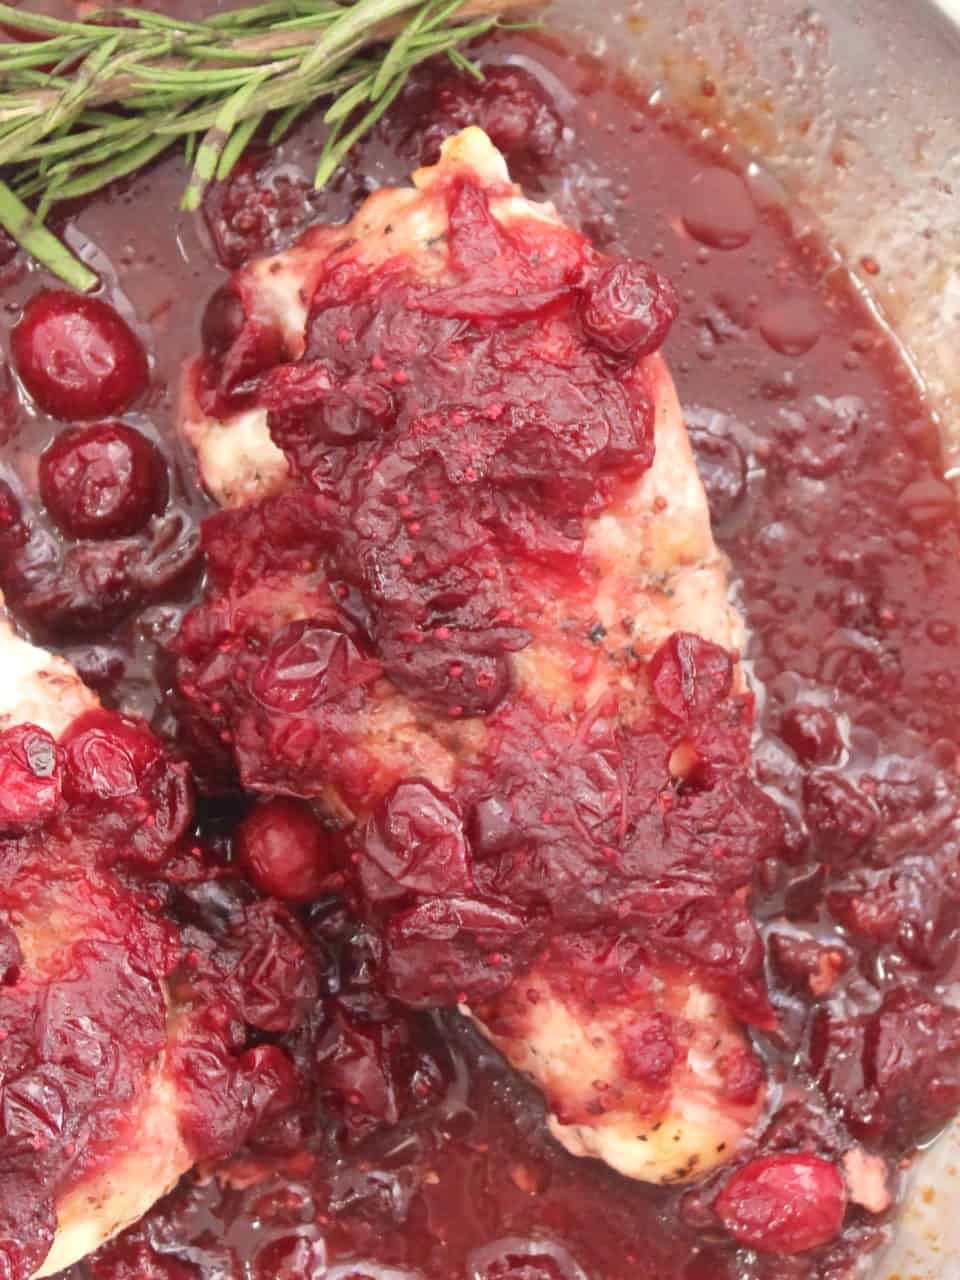 Close up of the cranberry sauce on top of a baked chicken breast.